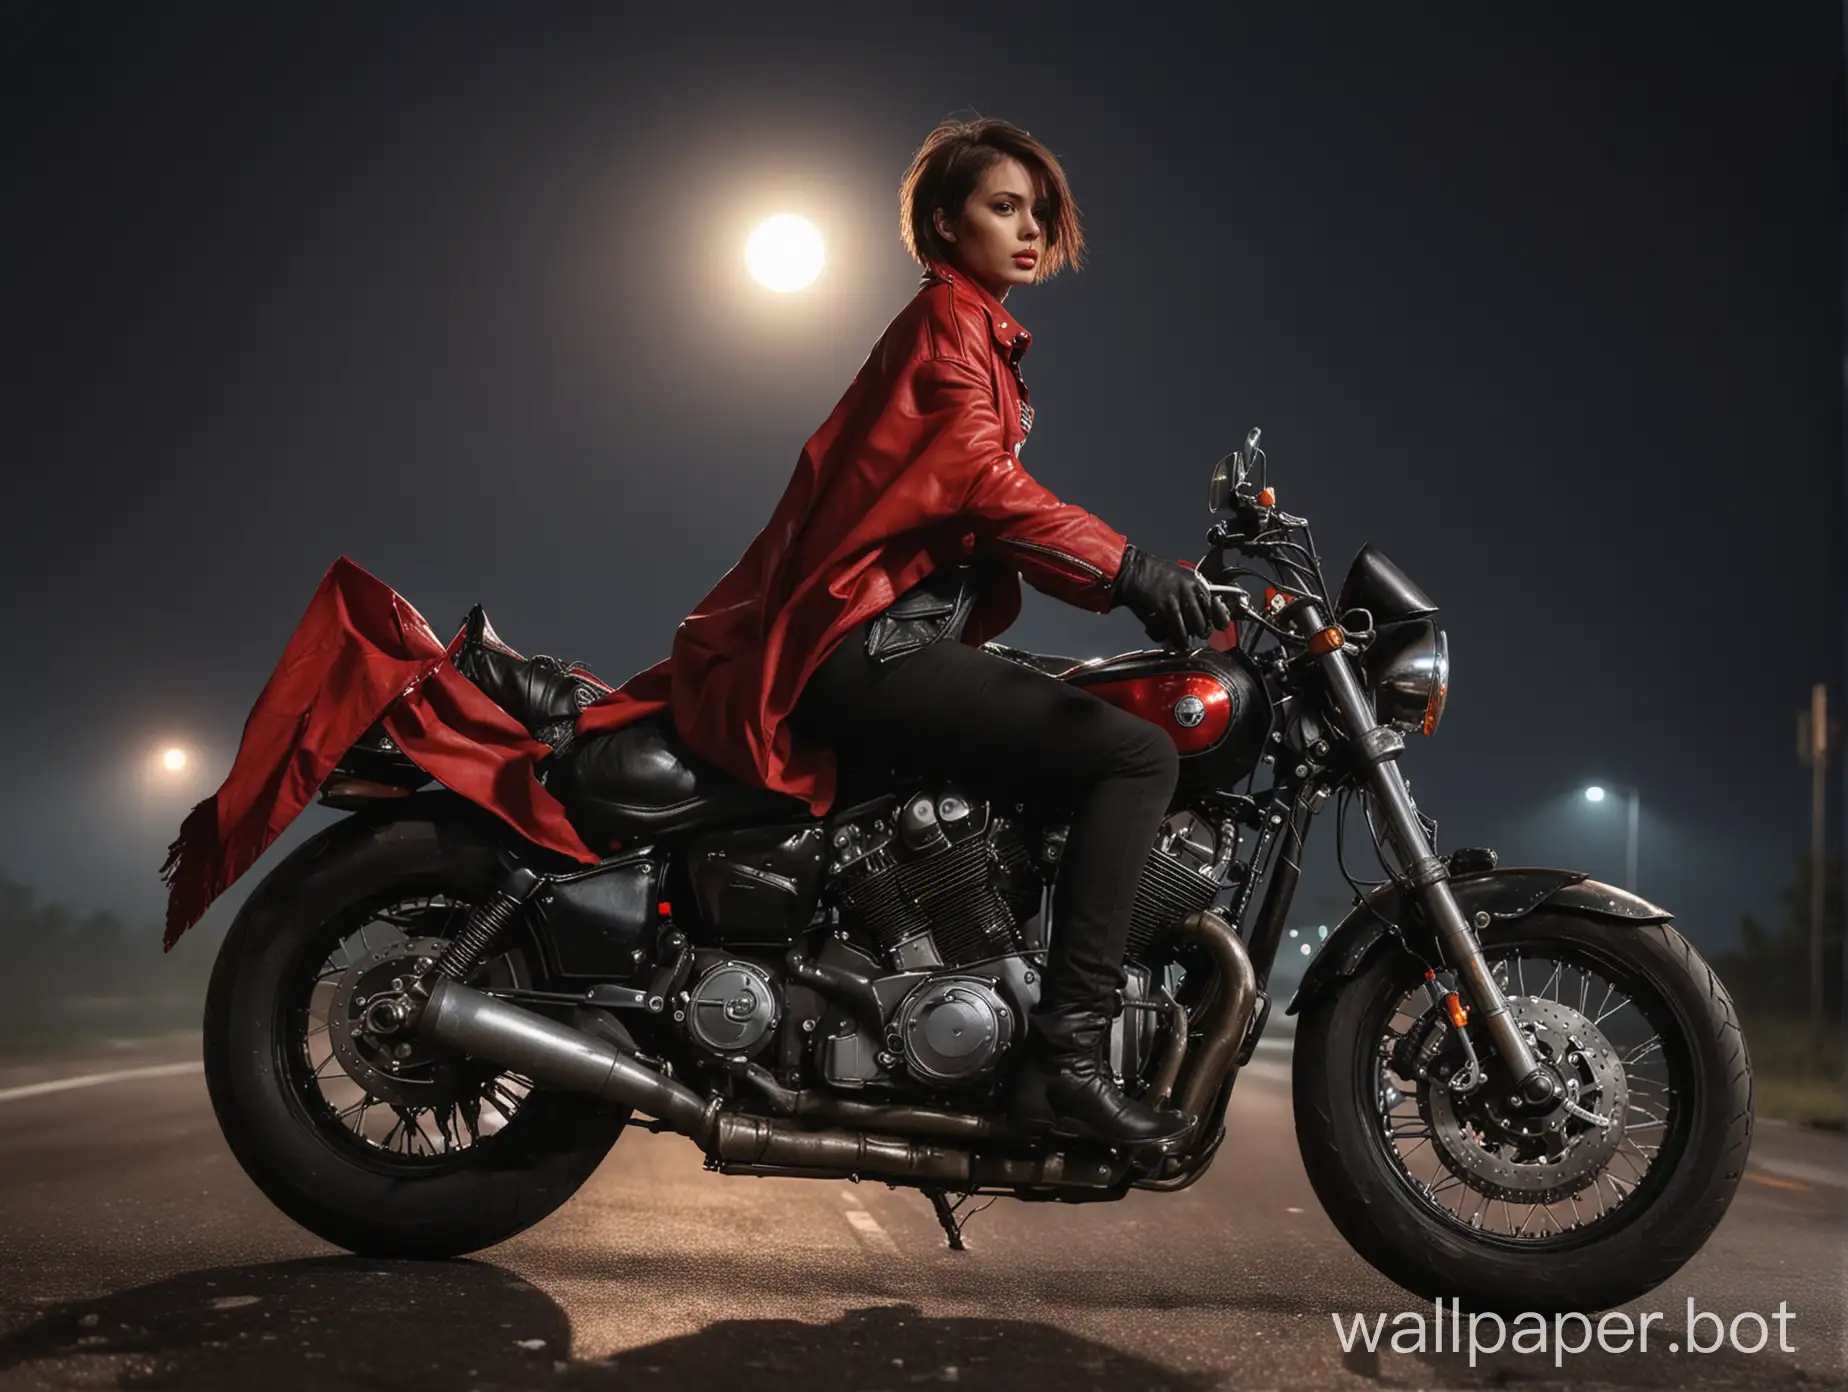 a sexy girl with short hair in a black leather jacket, with a large chest rides a motorcycle on the highway, a red cloak spreads on her shoulders in the wind, side view, asphalt burns under the wheels of the motorcycle, bright moon in the sky, dark background